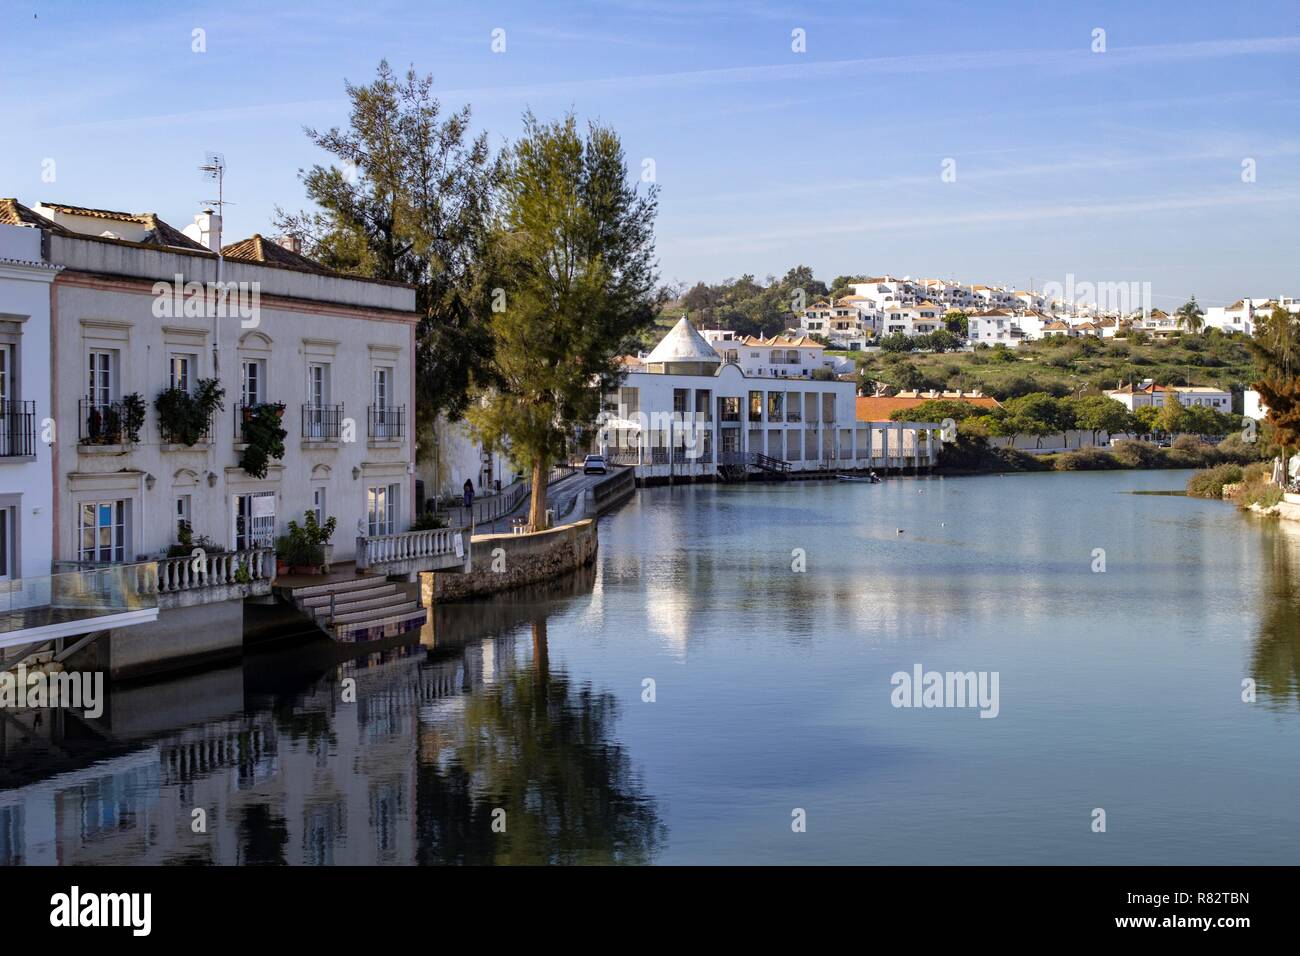 Tavira, Portugal. The quayside along the River Gilão in Tavira,Portugal with a view of the city in the background. Stock Photo